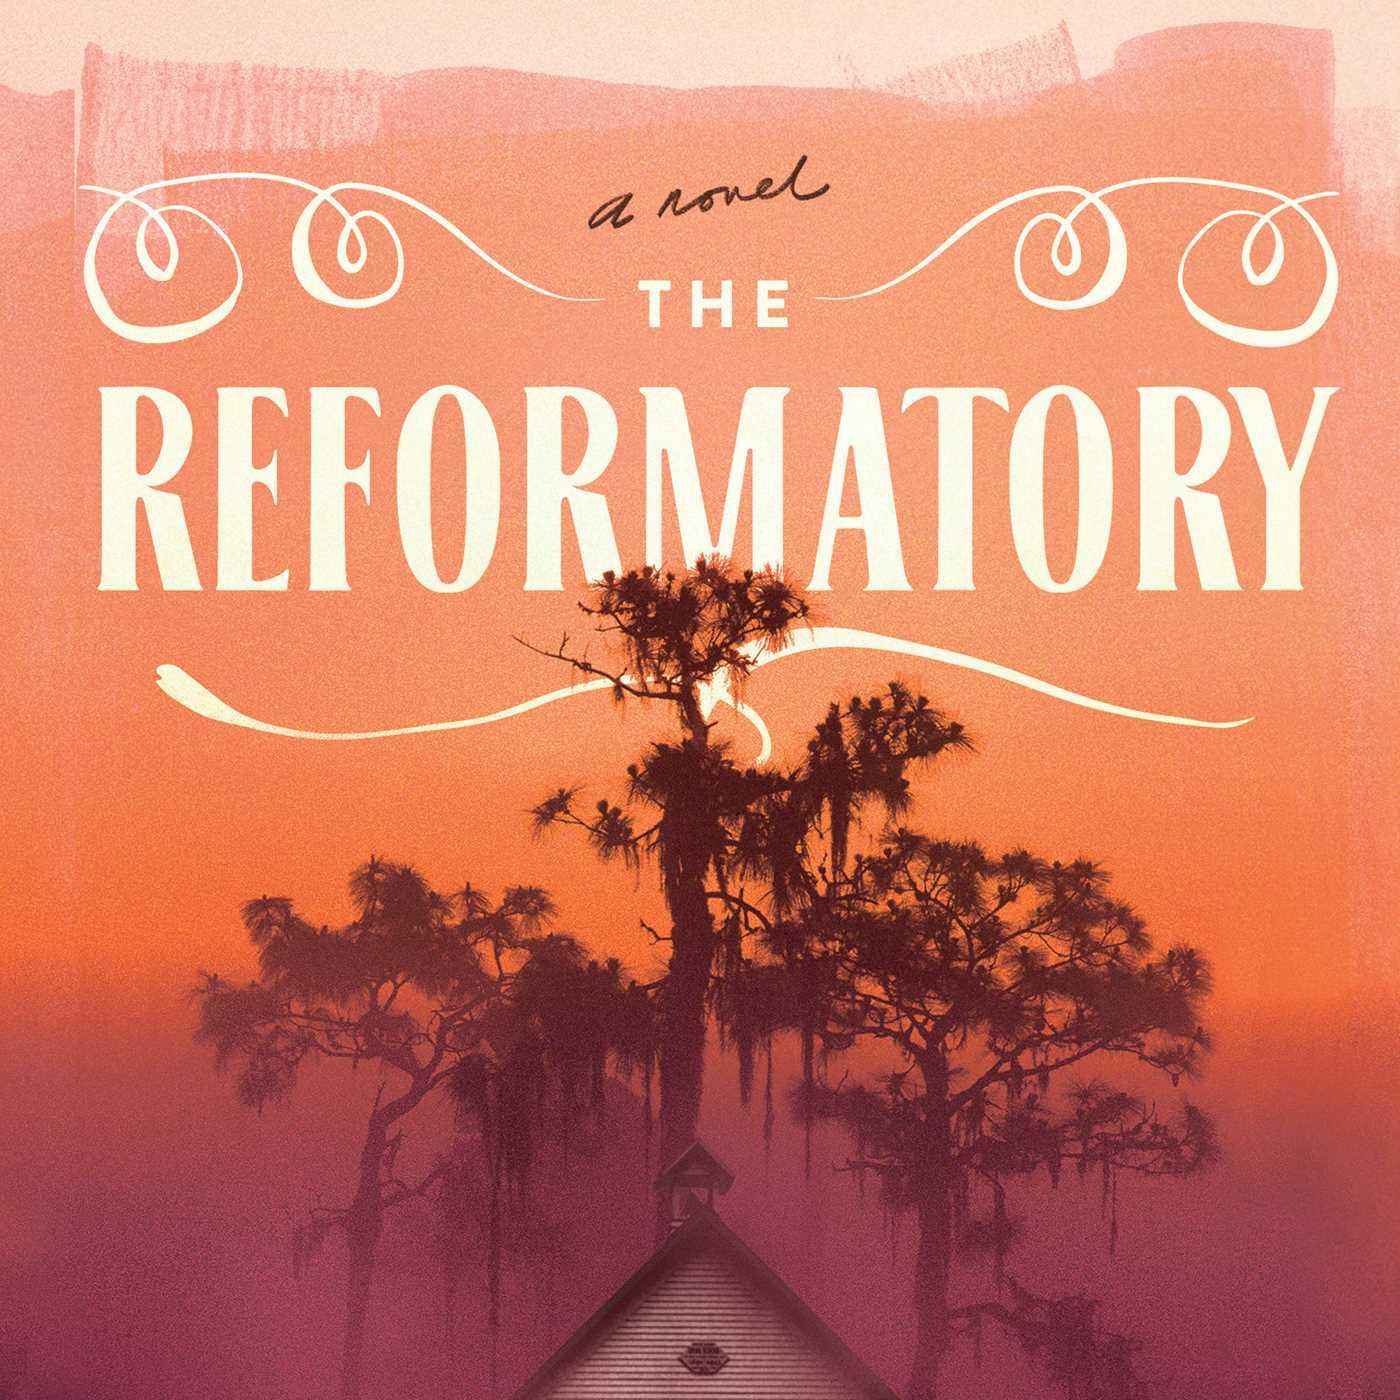 Announcing February's 'Get Lit' Book: Tananarive Due's Horror Novel
'The Reformatory'